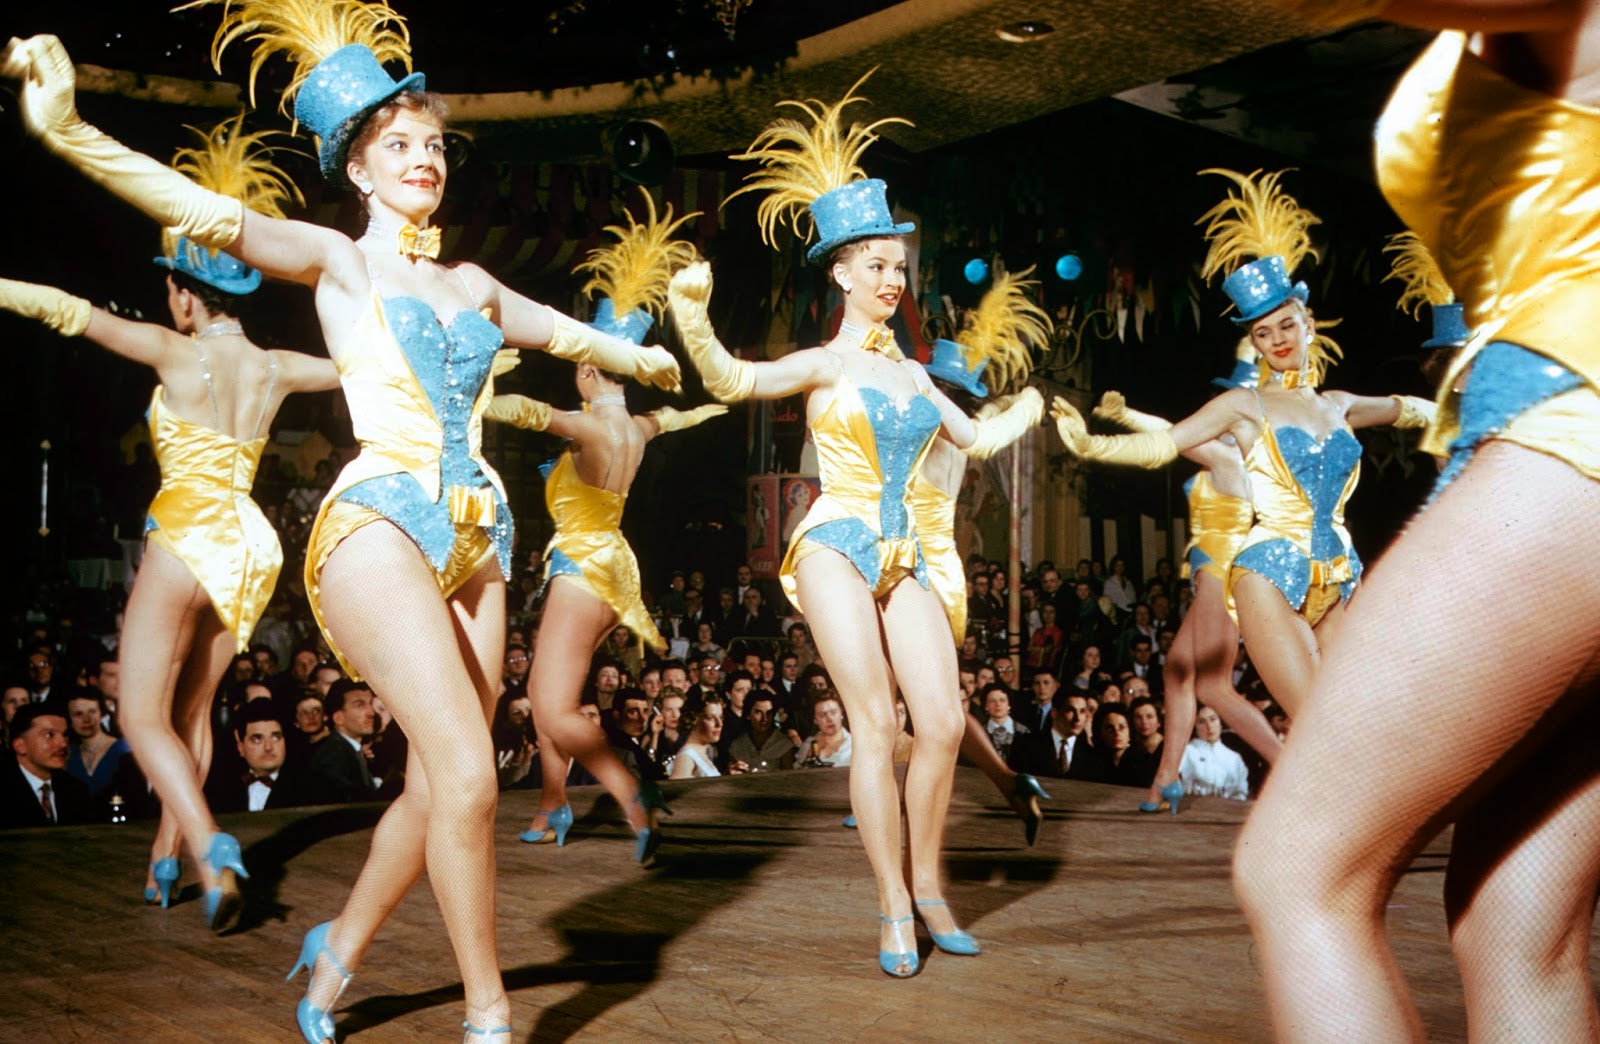 Amazing Color Photos of Cabaret Dancers at the Moulin Rouge in the late